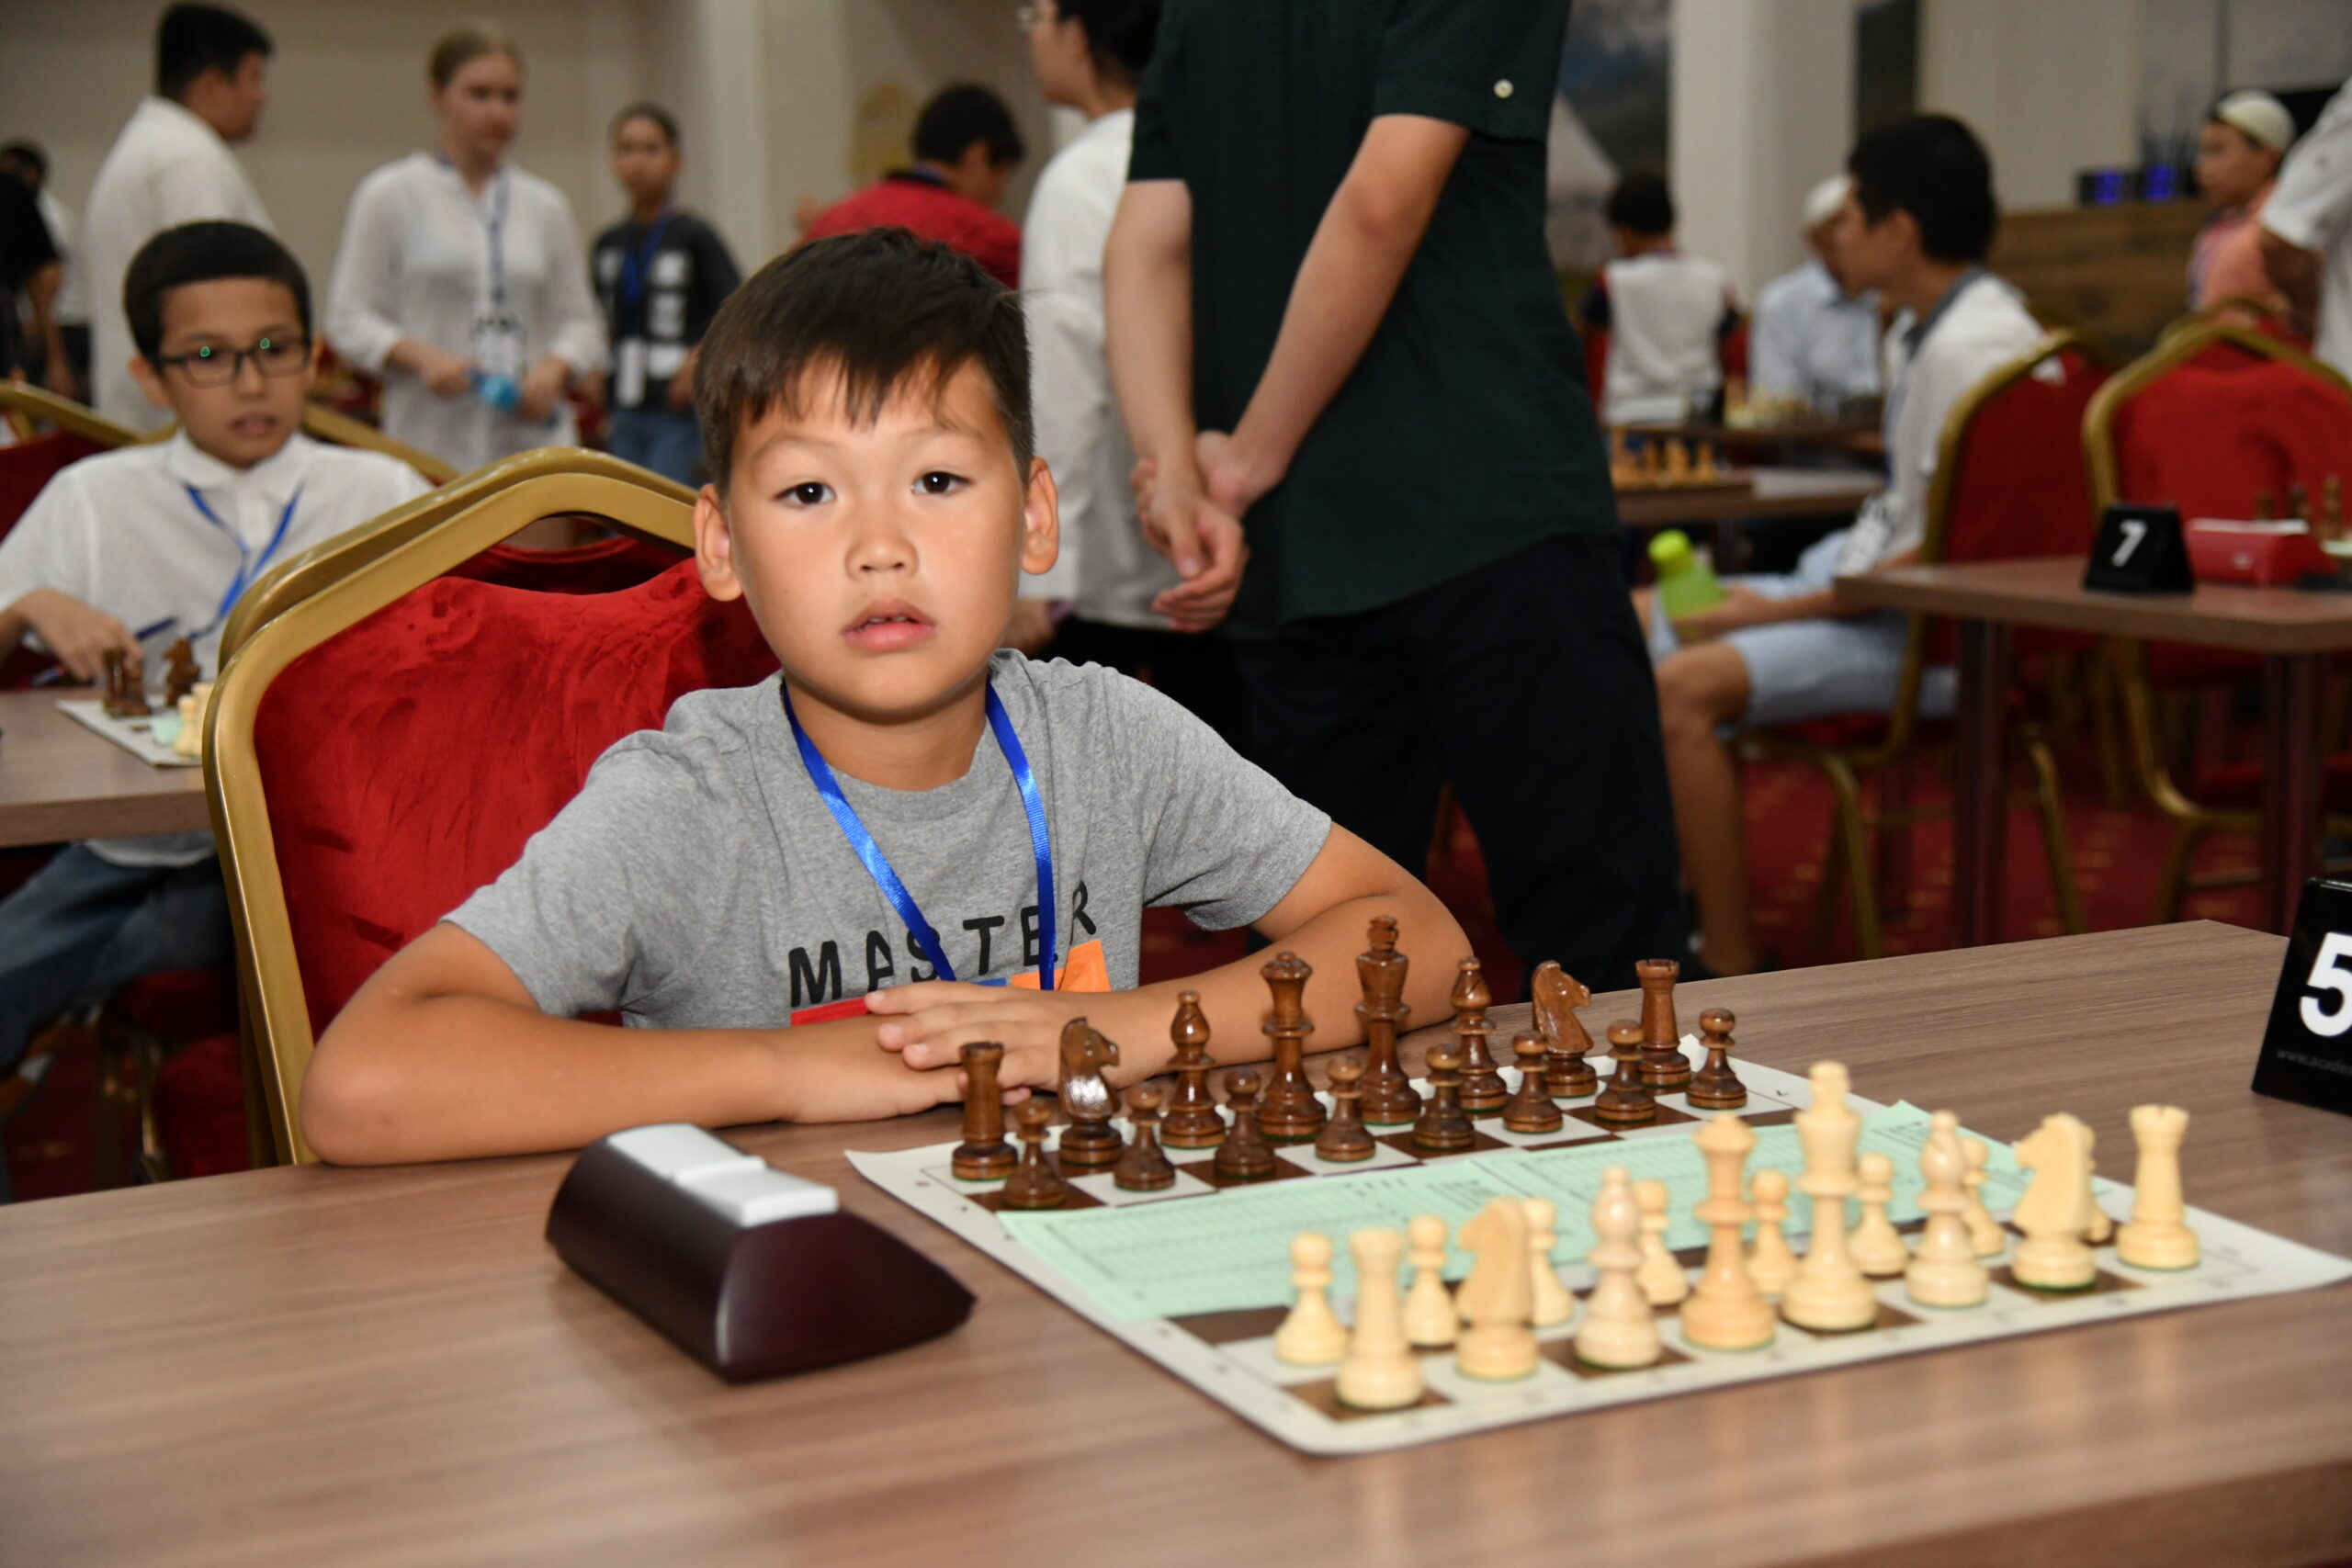 Best Chess Players Share $90,000 Prize Fund at International Chess